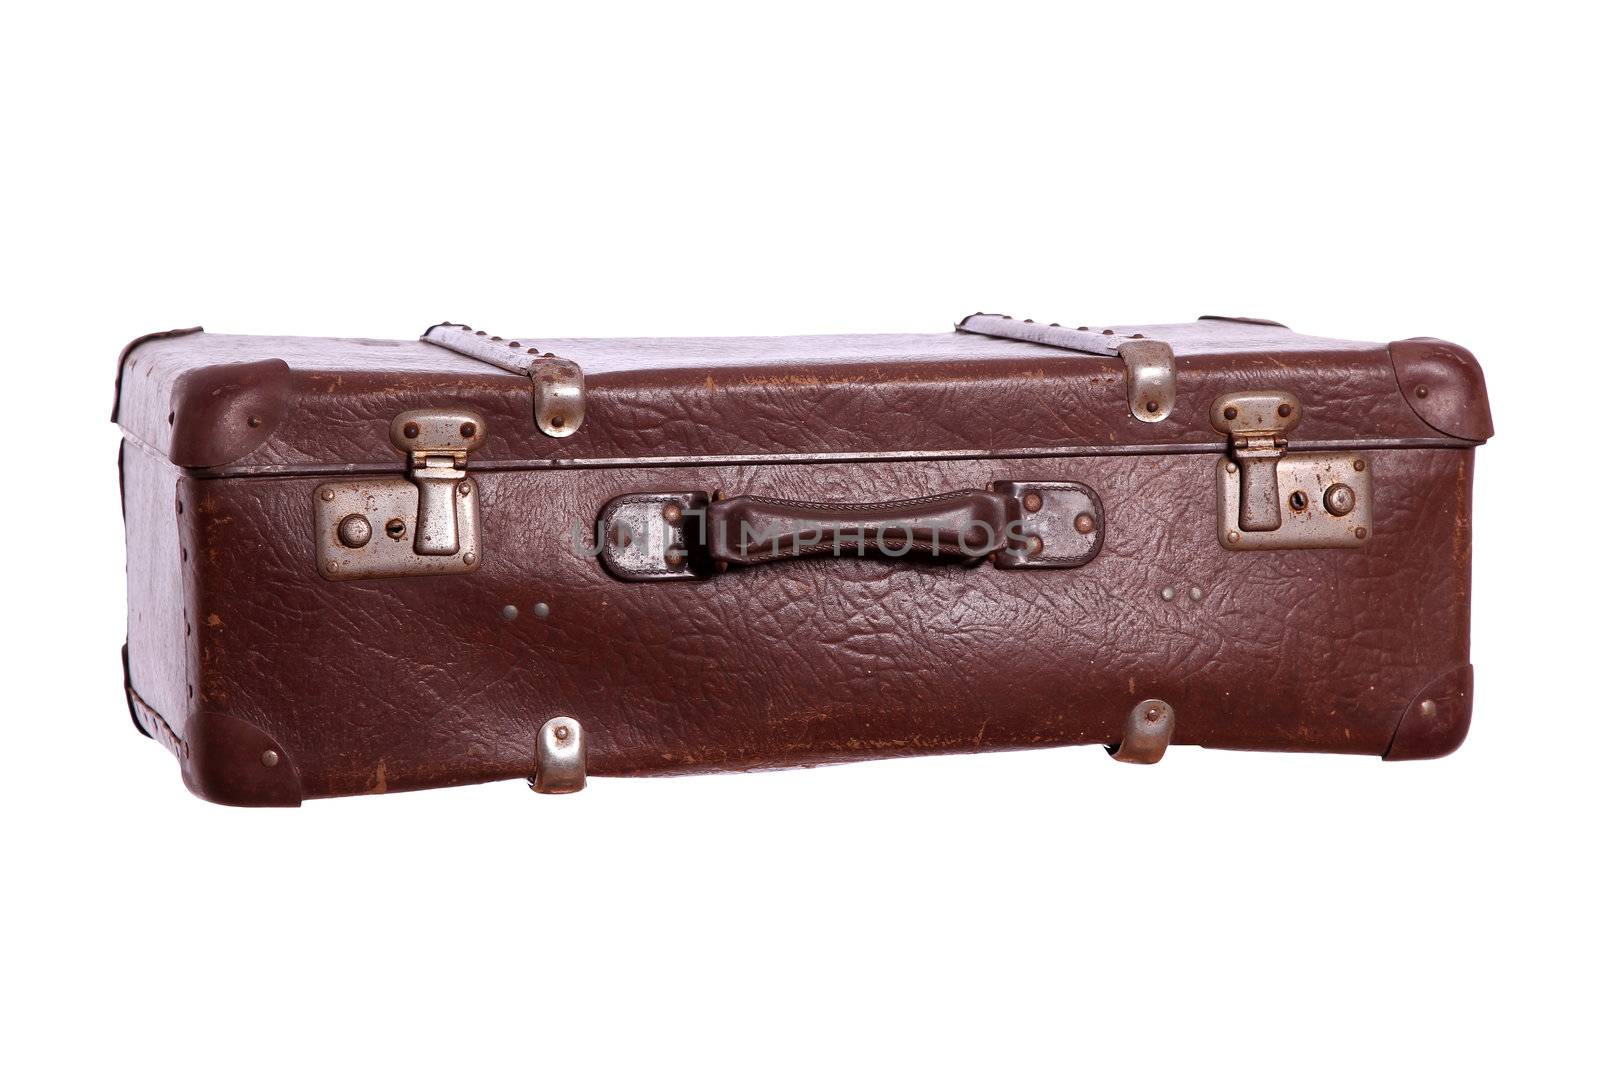 old suitcase made of brown leather